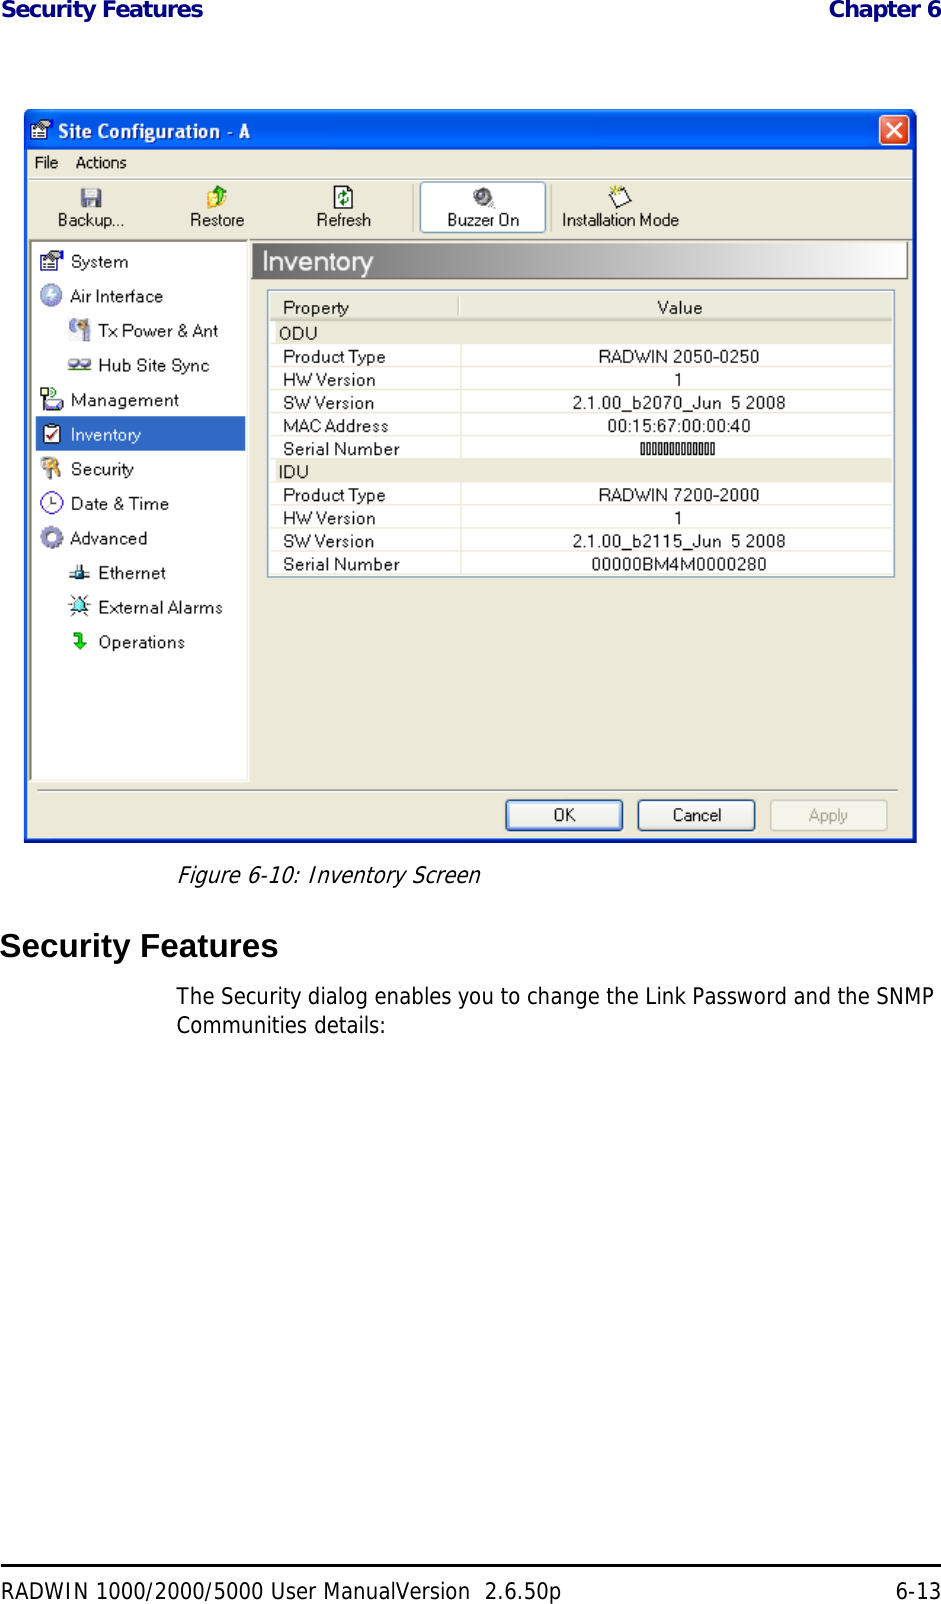 Security Features  Chapter 6RADWIN 1000/2000/5000 User ManualVersion  2.6.50p 6-13Figure 6-10: Inventory ScreenSecurity FeaturesThe Security dialog enables you to change the Link Password and the SNMP Communities details: